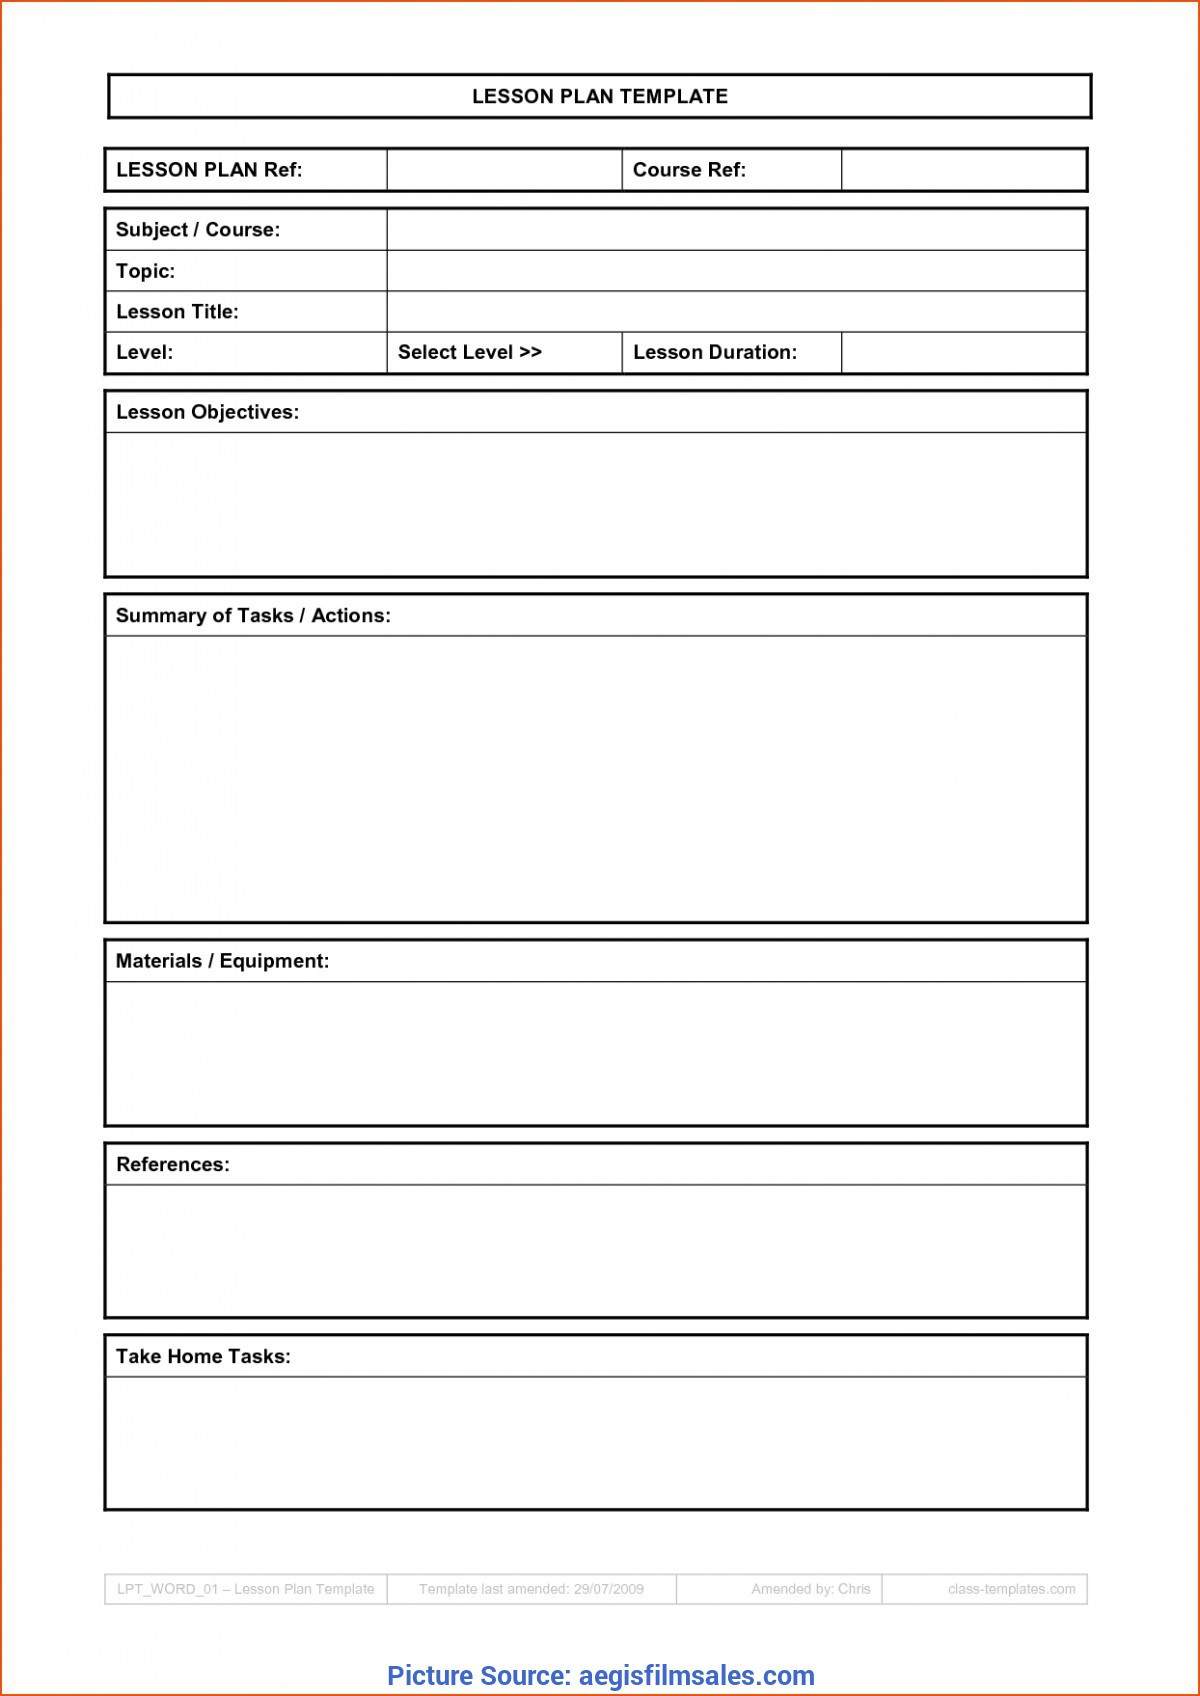 Lesson Plan Websites Ota Tech Find Lesson Template Ideas for Your Activity